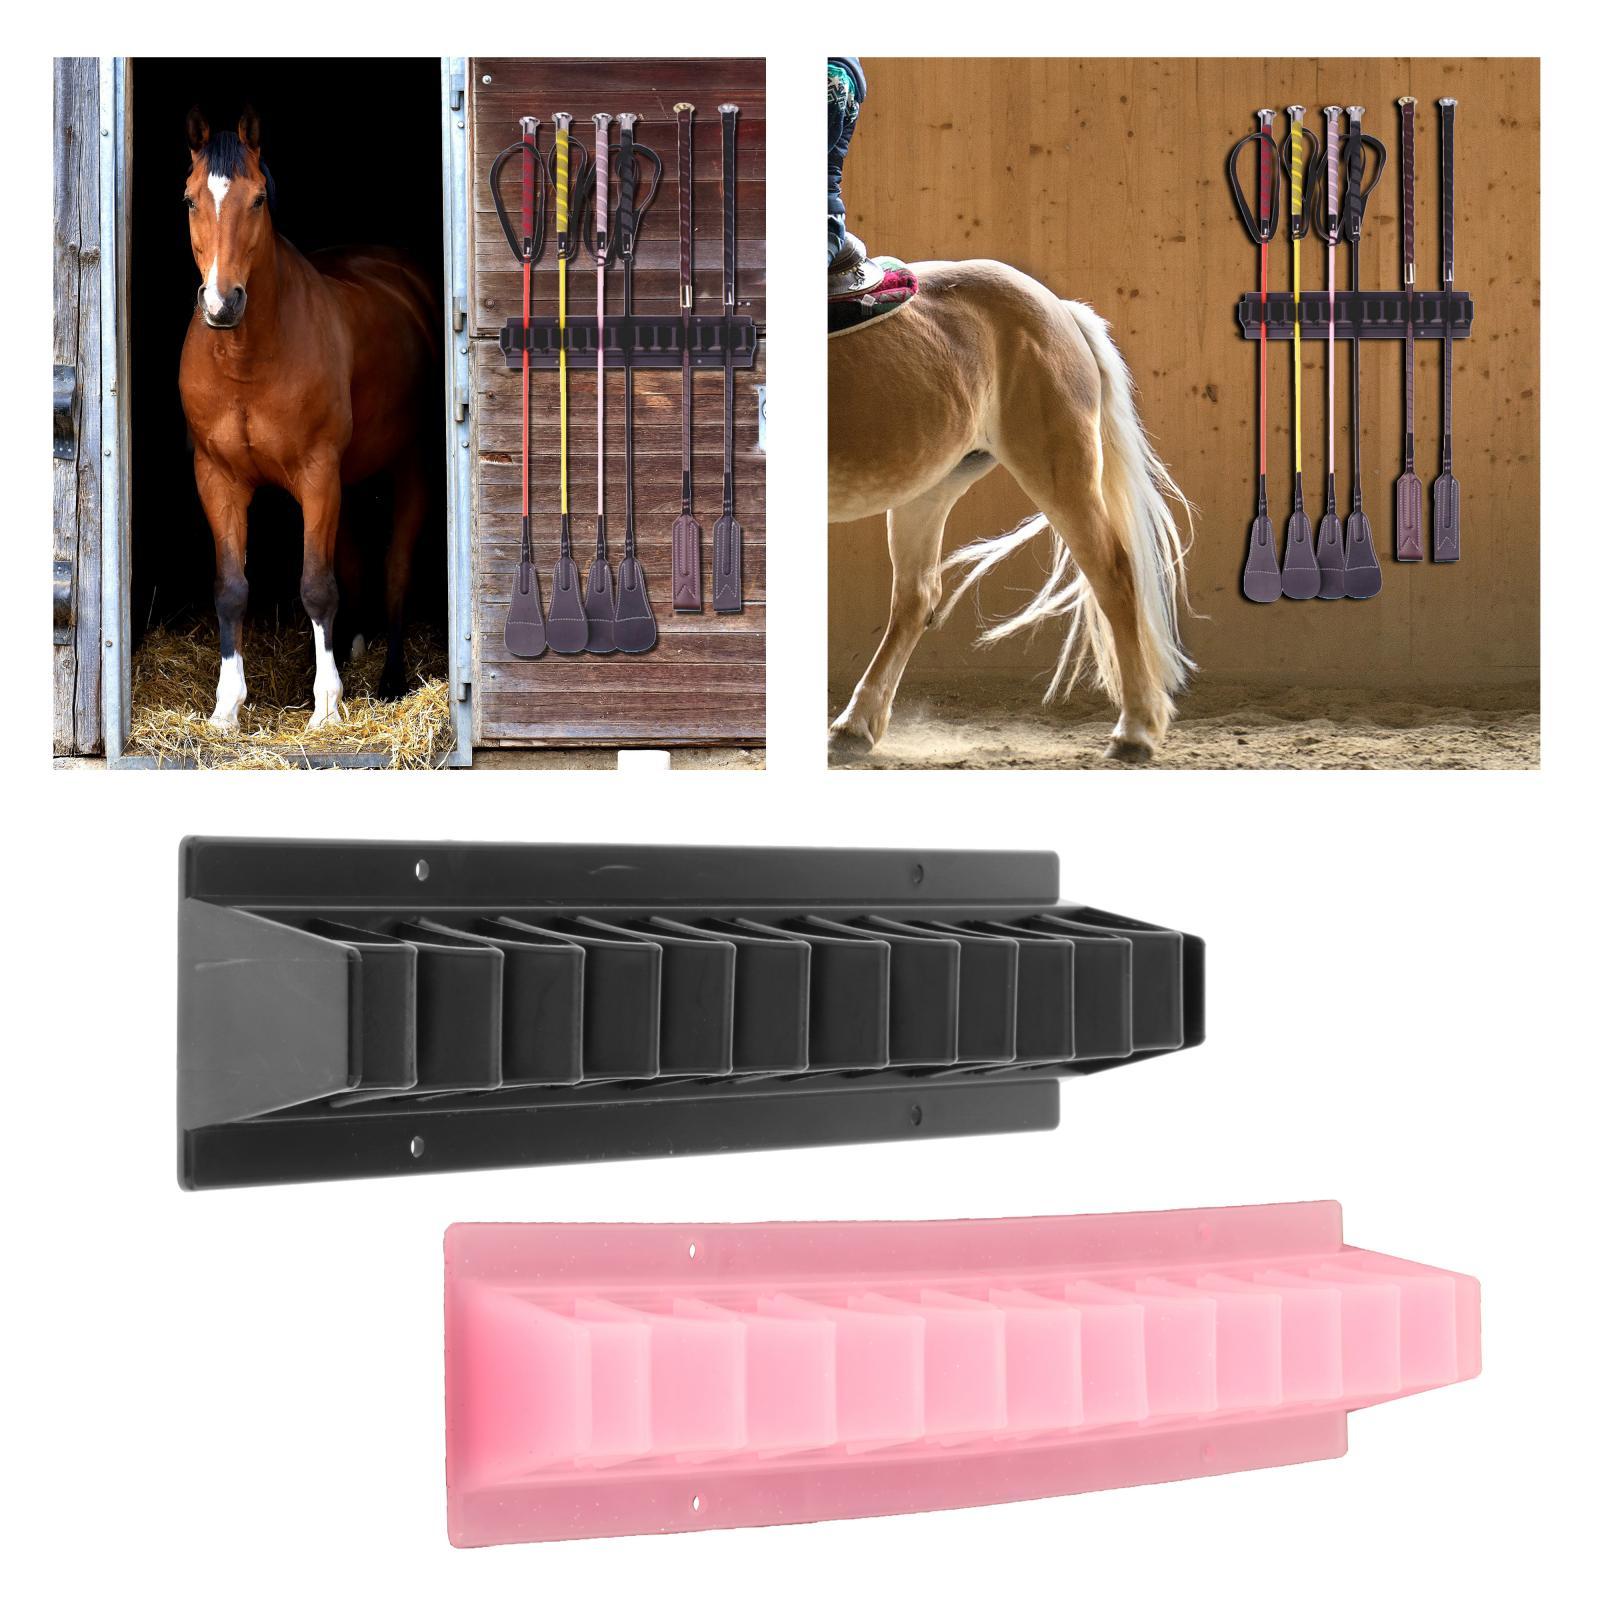 Strong Plastic Horse Whip Rack, Whips Organizer and Holder Wall mounted - Holds up to 12 whips